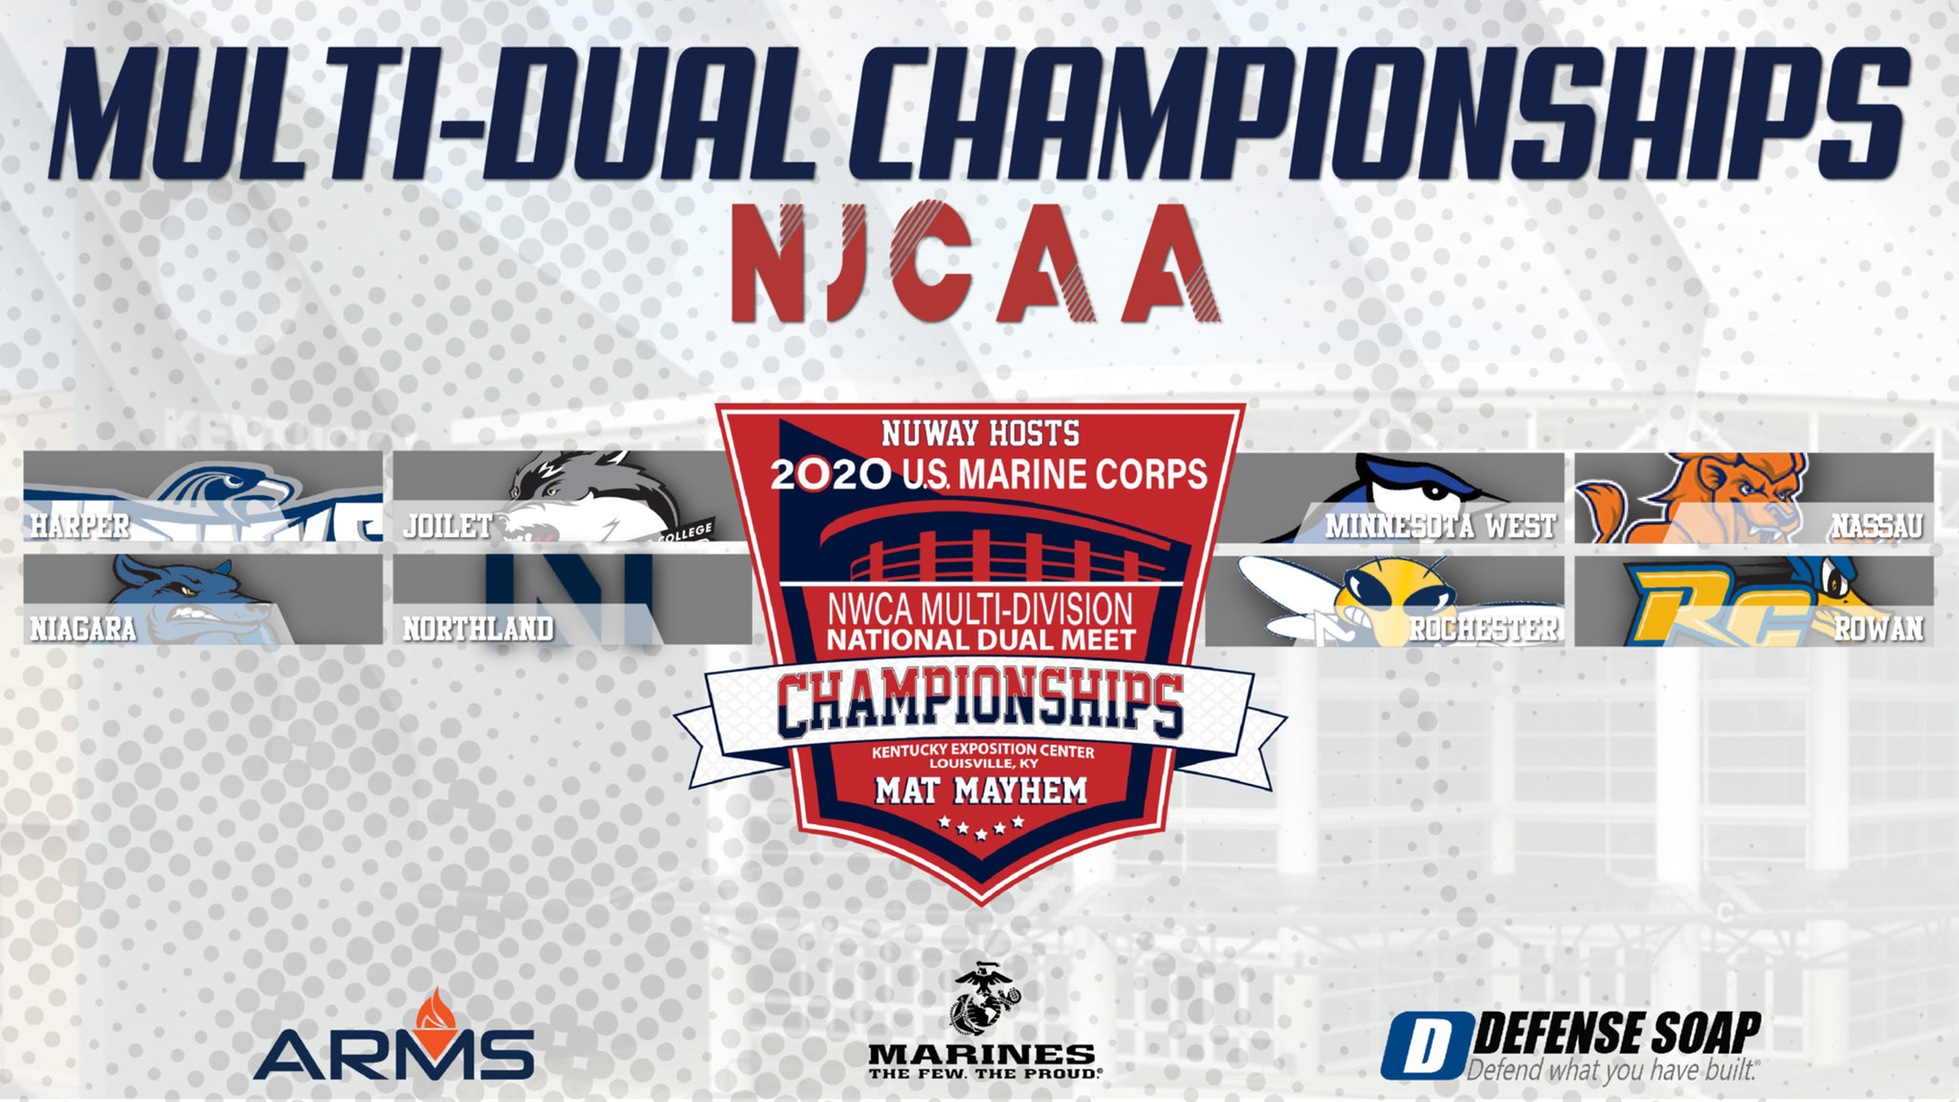 NCCC finishes fourth at National Duals